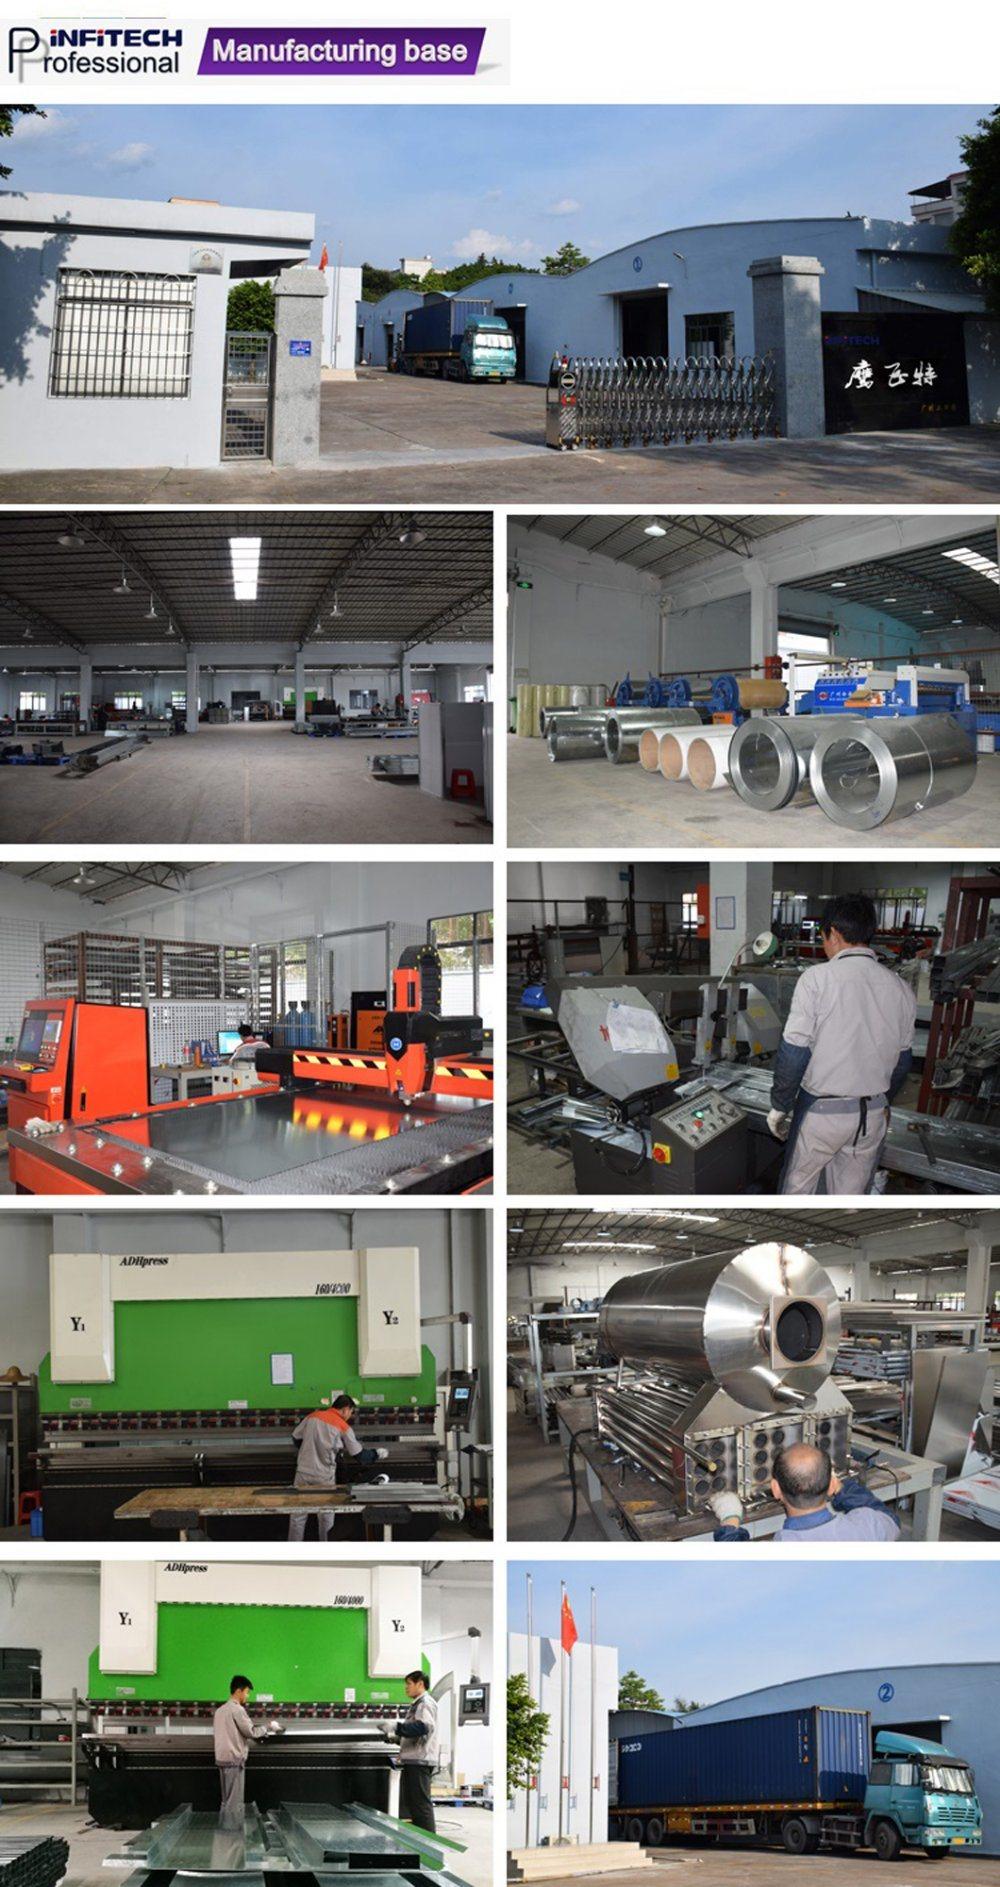 European Standard Car Preparation Booths with Infrared Baking Lamp for Automobile